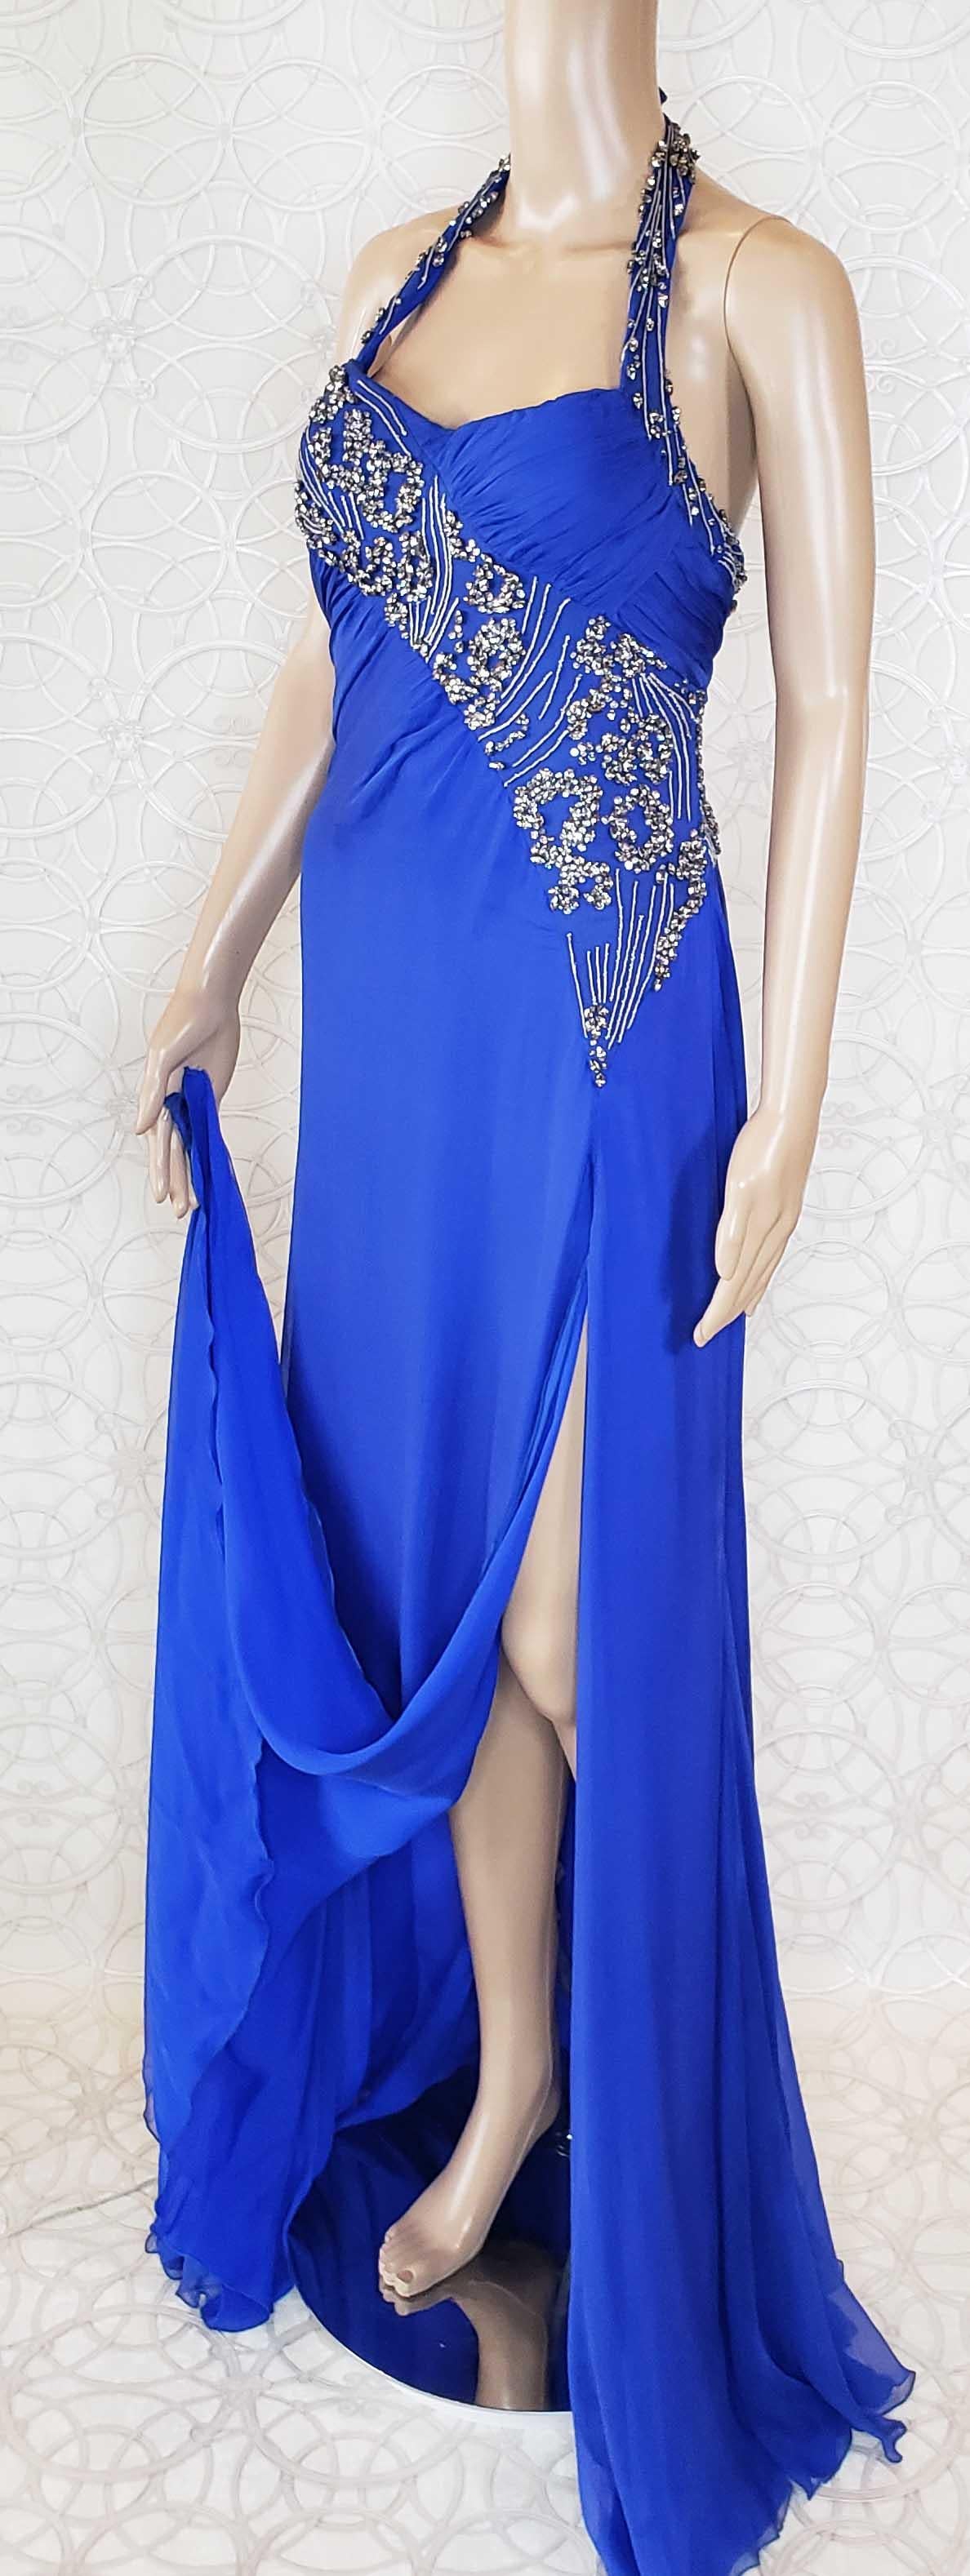 F/W 2009 NEW VERSACE BLUE SILK EMBROIDERED HALTER Gown 42 - 6 For Sale 5